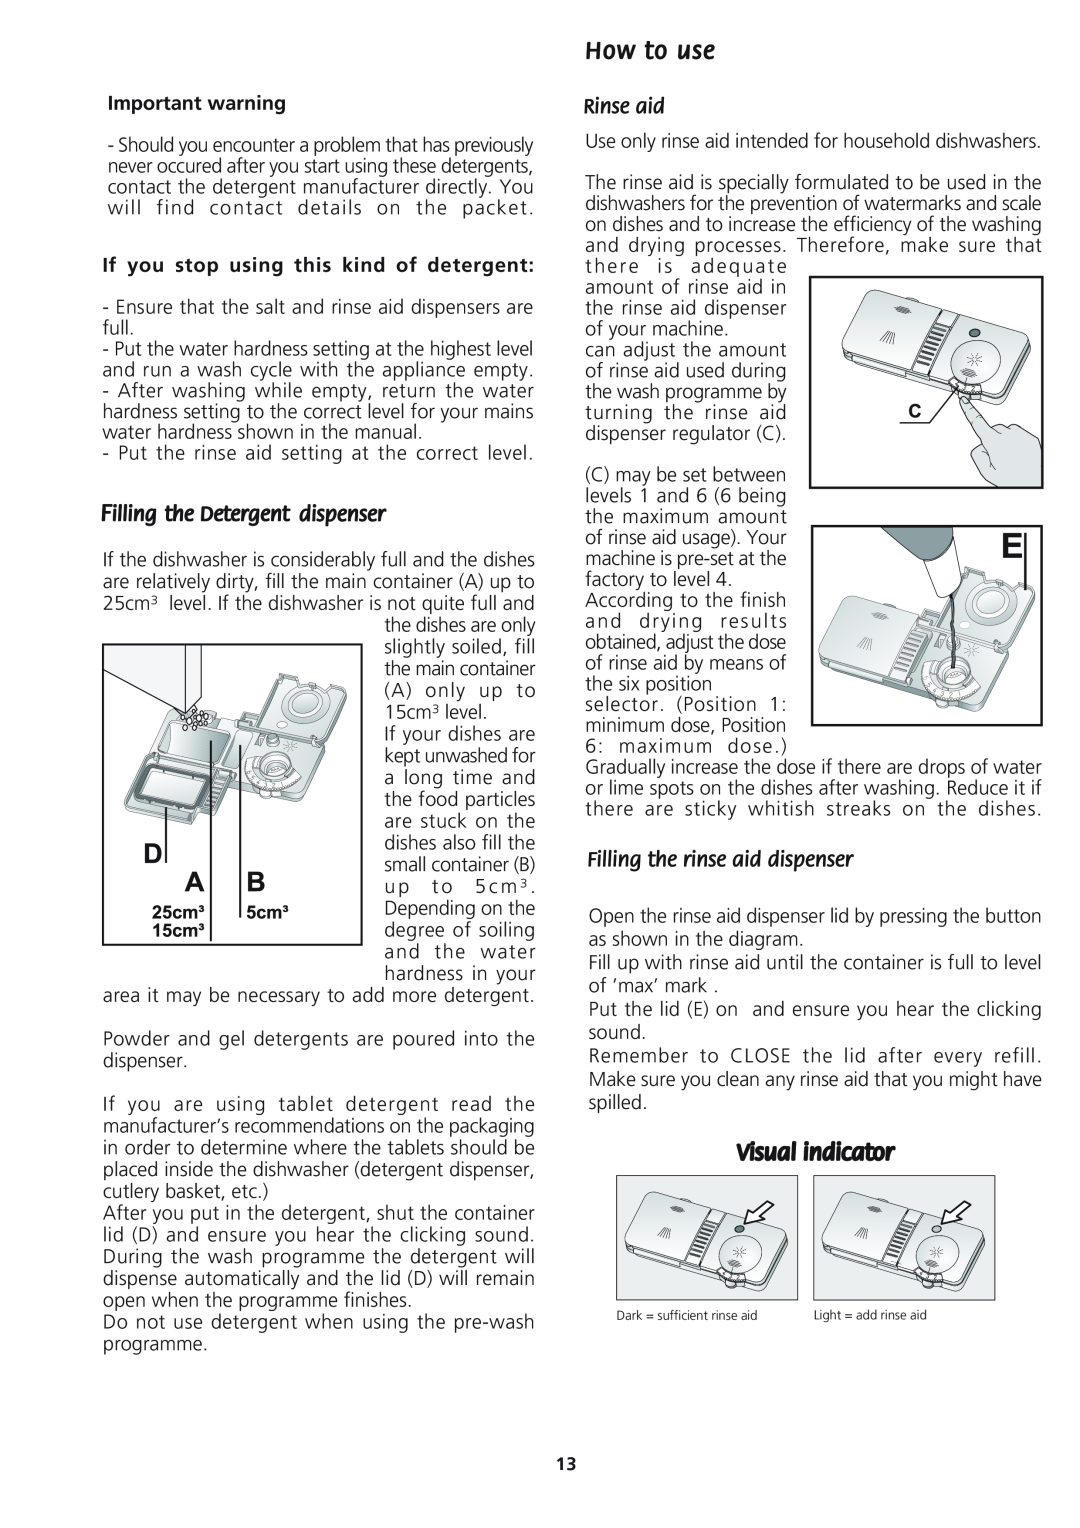 Beko DWD 8657 manual Important warning, If you stop using this kind of detergent 